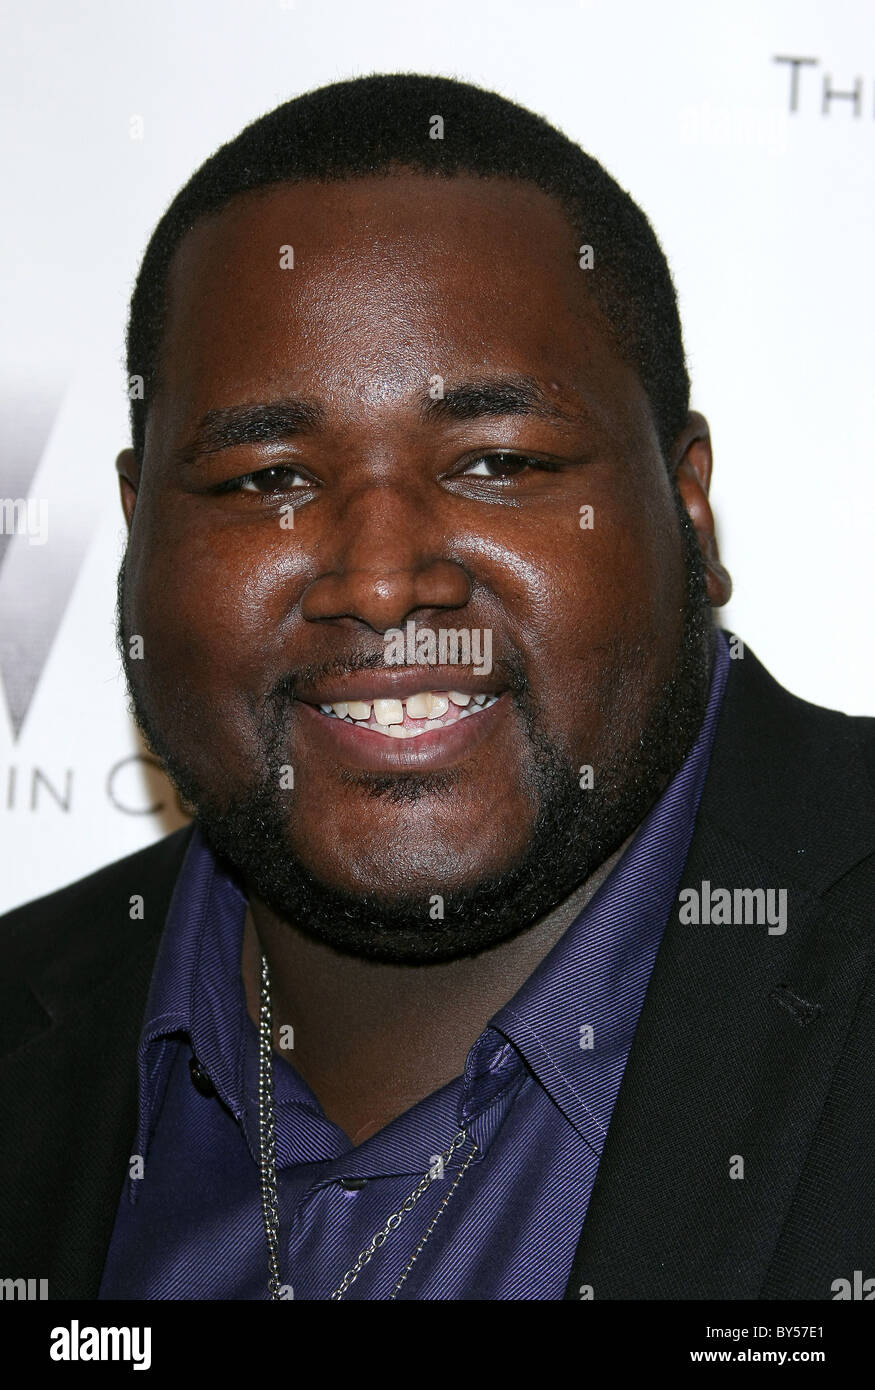 QUINTON AARON RELATIVITY MEDIA AND THE WEINSTEIN COMPANY 2011 GOLDEN GLOBES AFTER PARTY BEVERLY HILLS LOS ANGELES CALIFORNIA Stock Photo